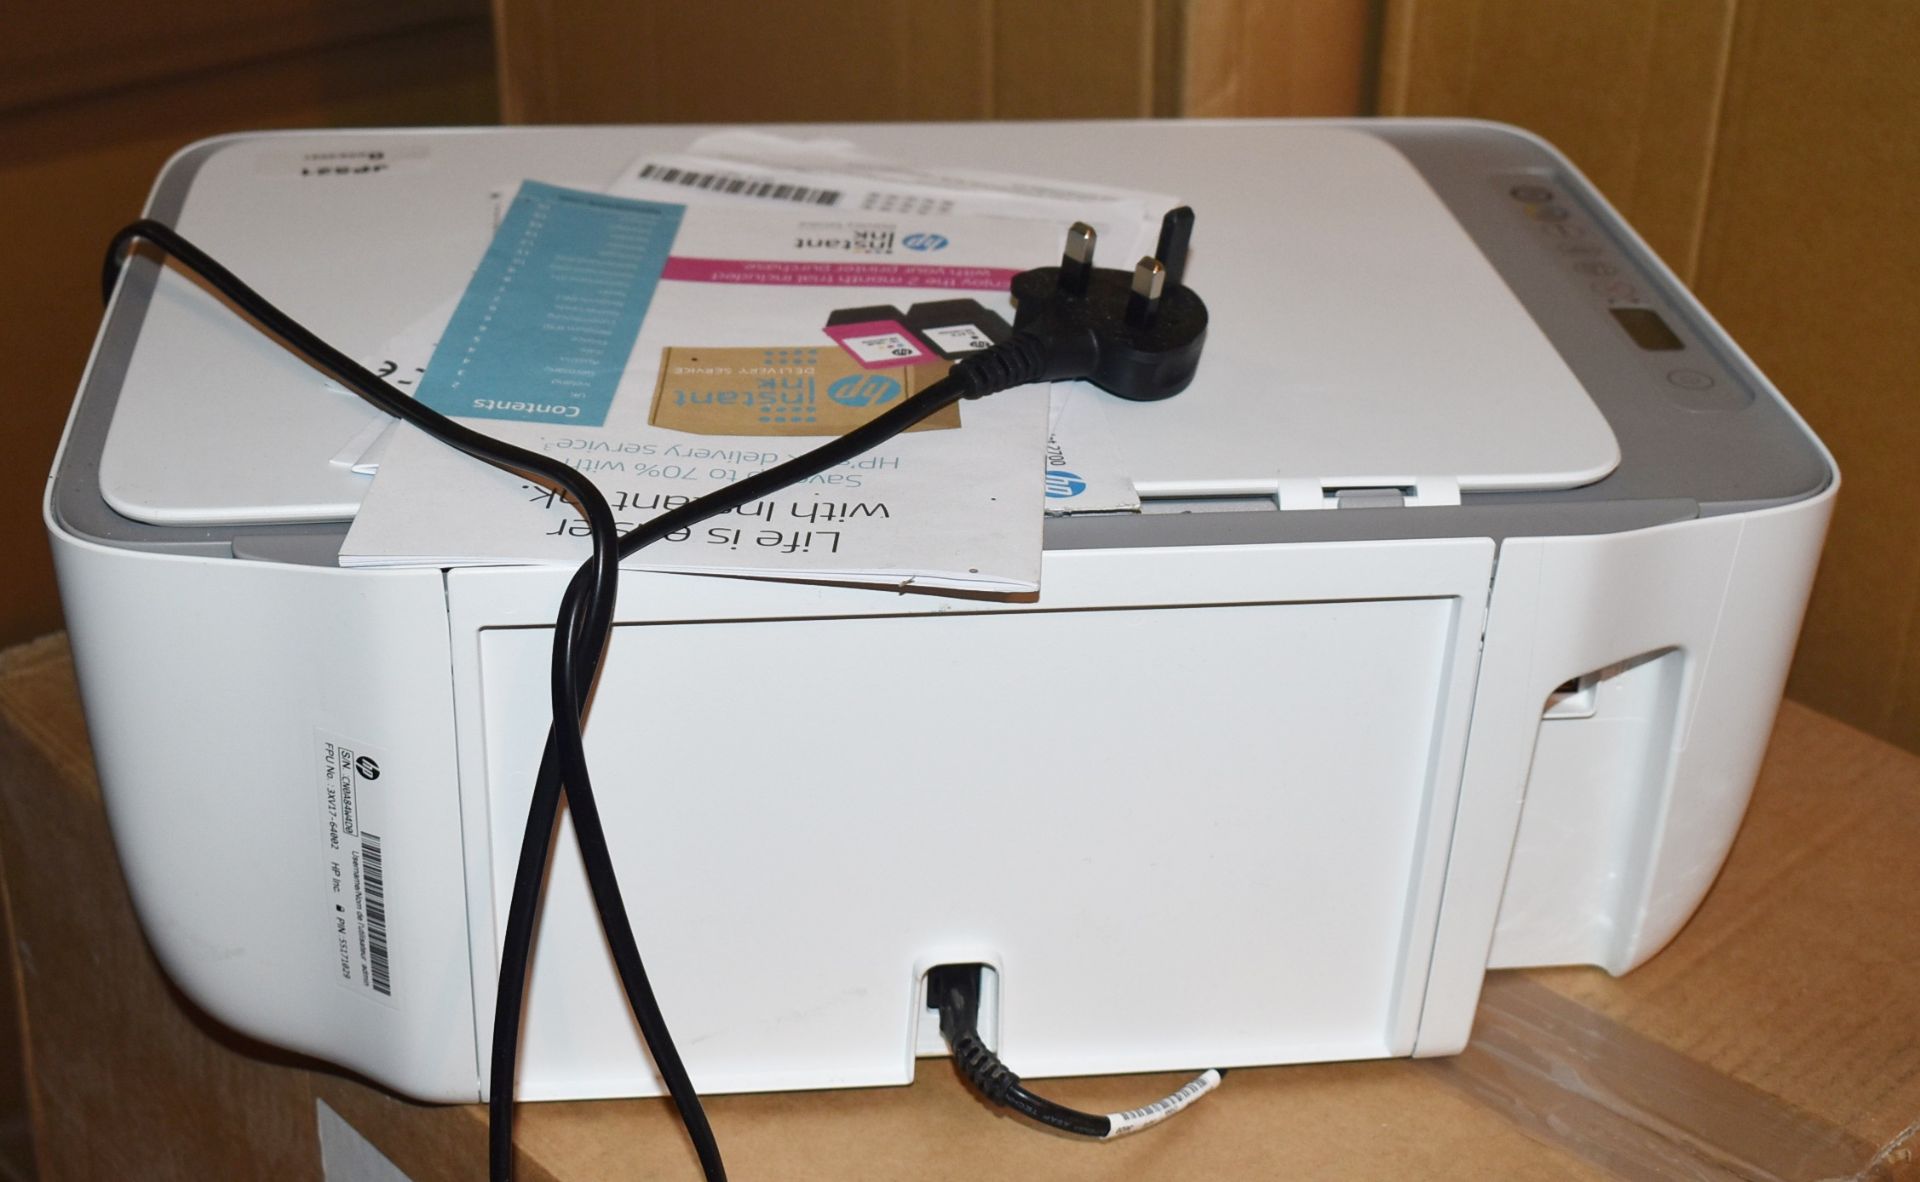 1 x HP Deskjet 2720 All-in-One Wireless Printer With Full Box of Printer Paper - Ref JP521 WH2 - - Image 3 of 4